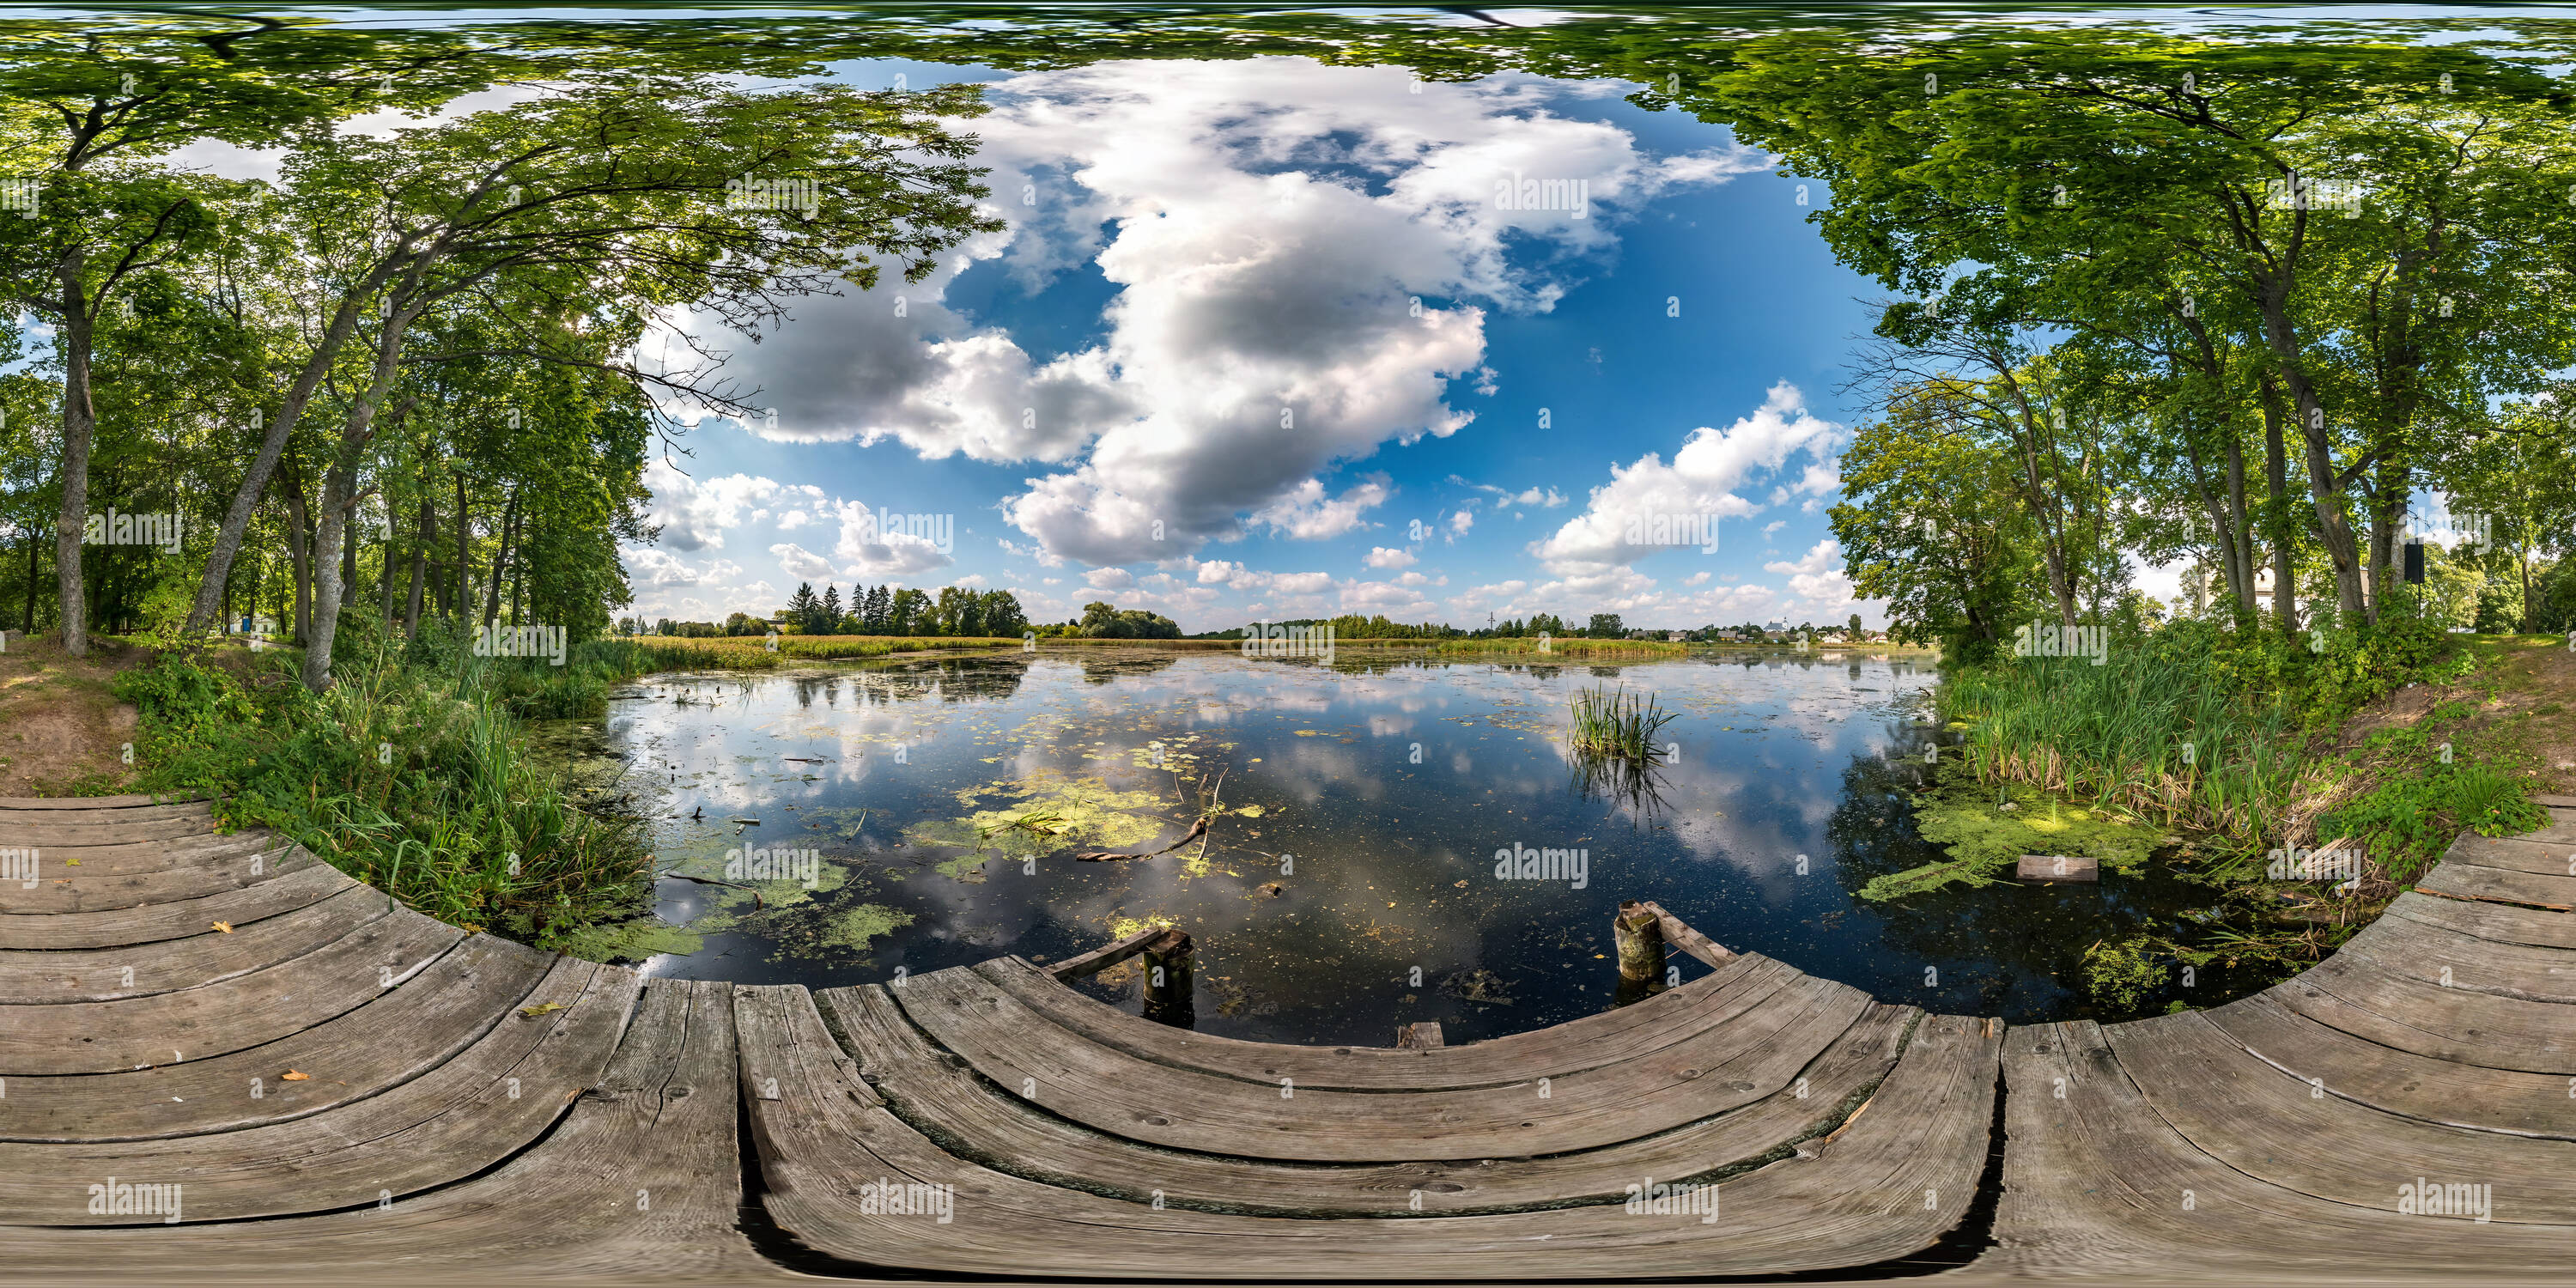 360 degree panoramic view of full seamless spherical hdri panorama 360 degrees angle view on wooden pier among the bushes of forest near river or lake in equirectangular projectio